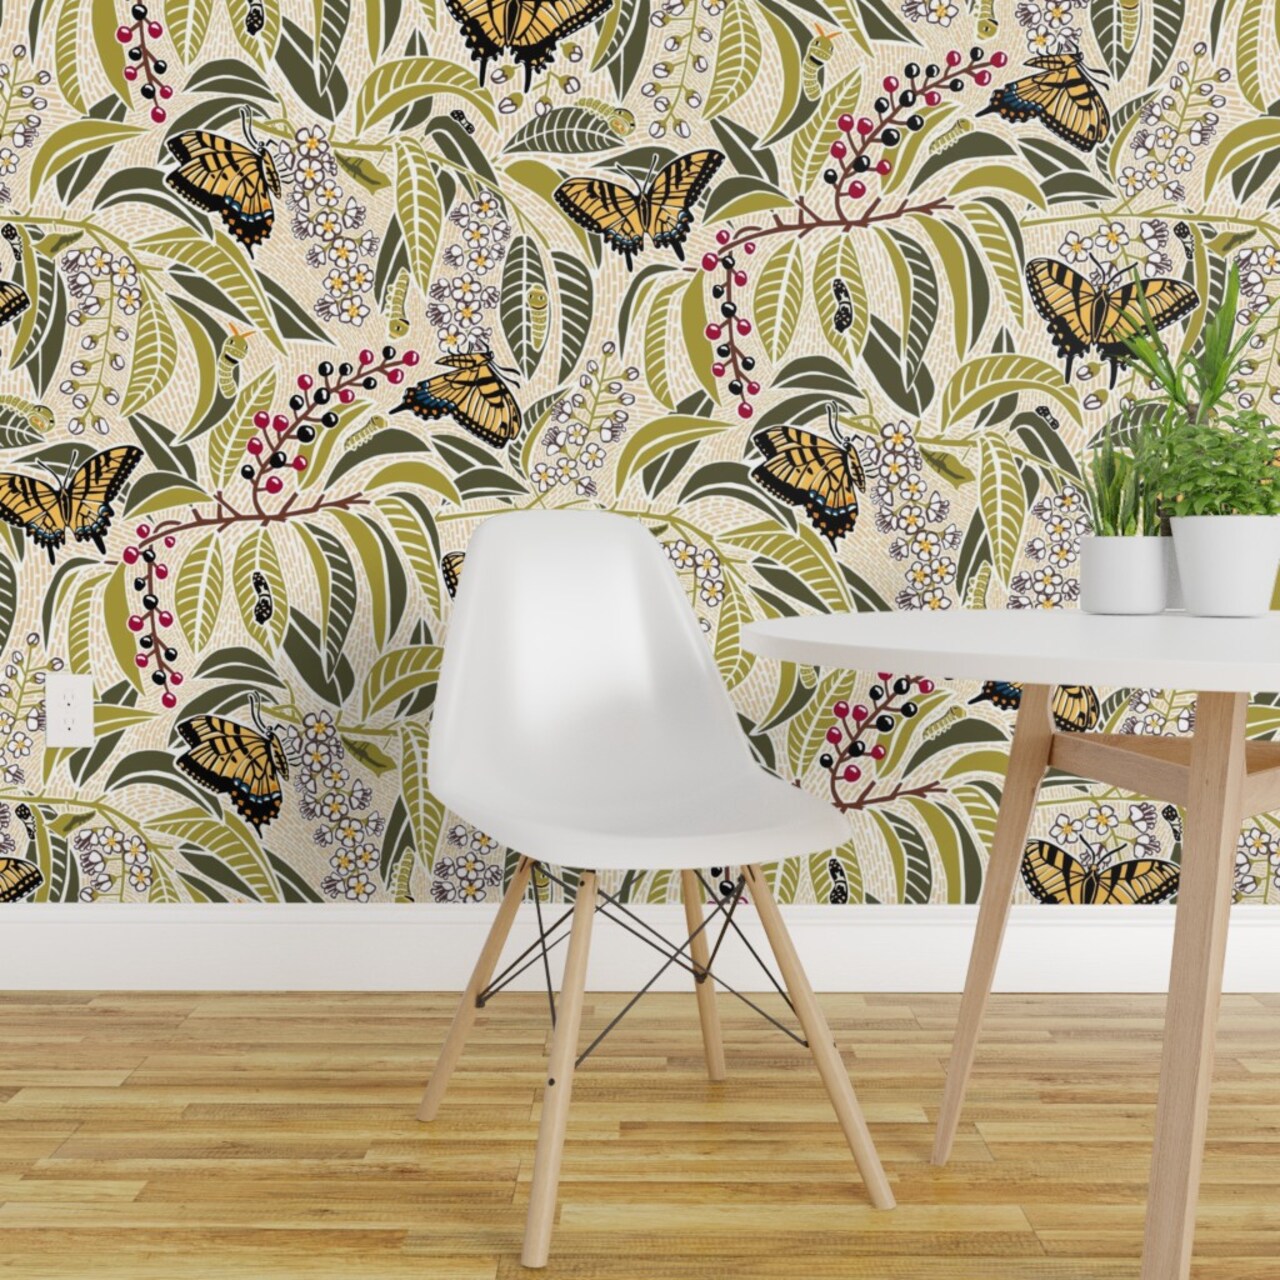 Peel &#x26; Stick Wallpaper 2FT Wide Butterfly Botanical Floral Swallowtail Butterflies Large Scale Custom Removable Wallpaper by Spoonflower